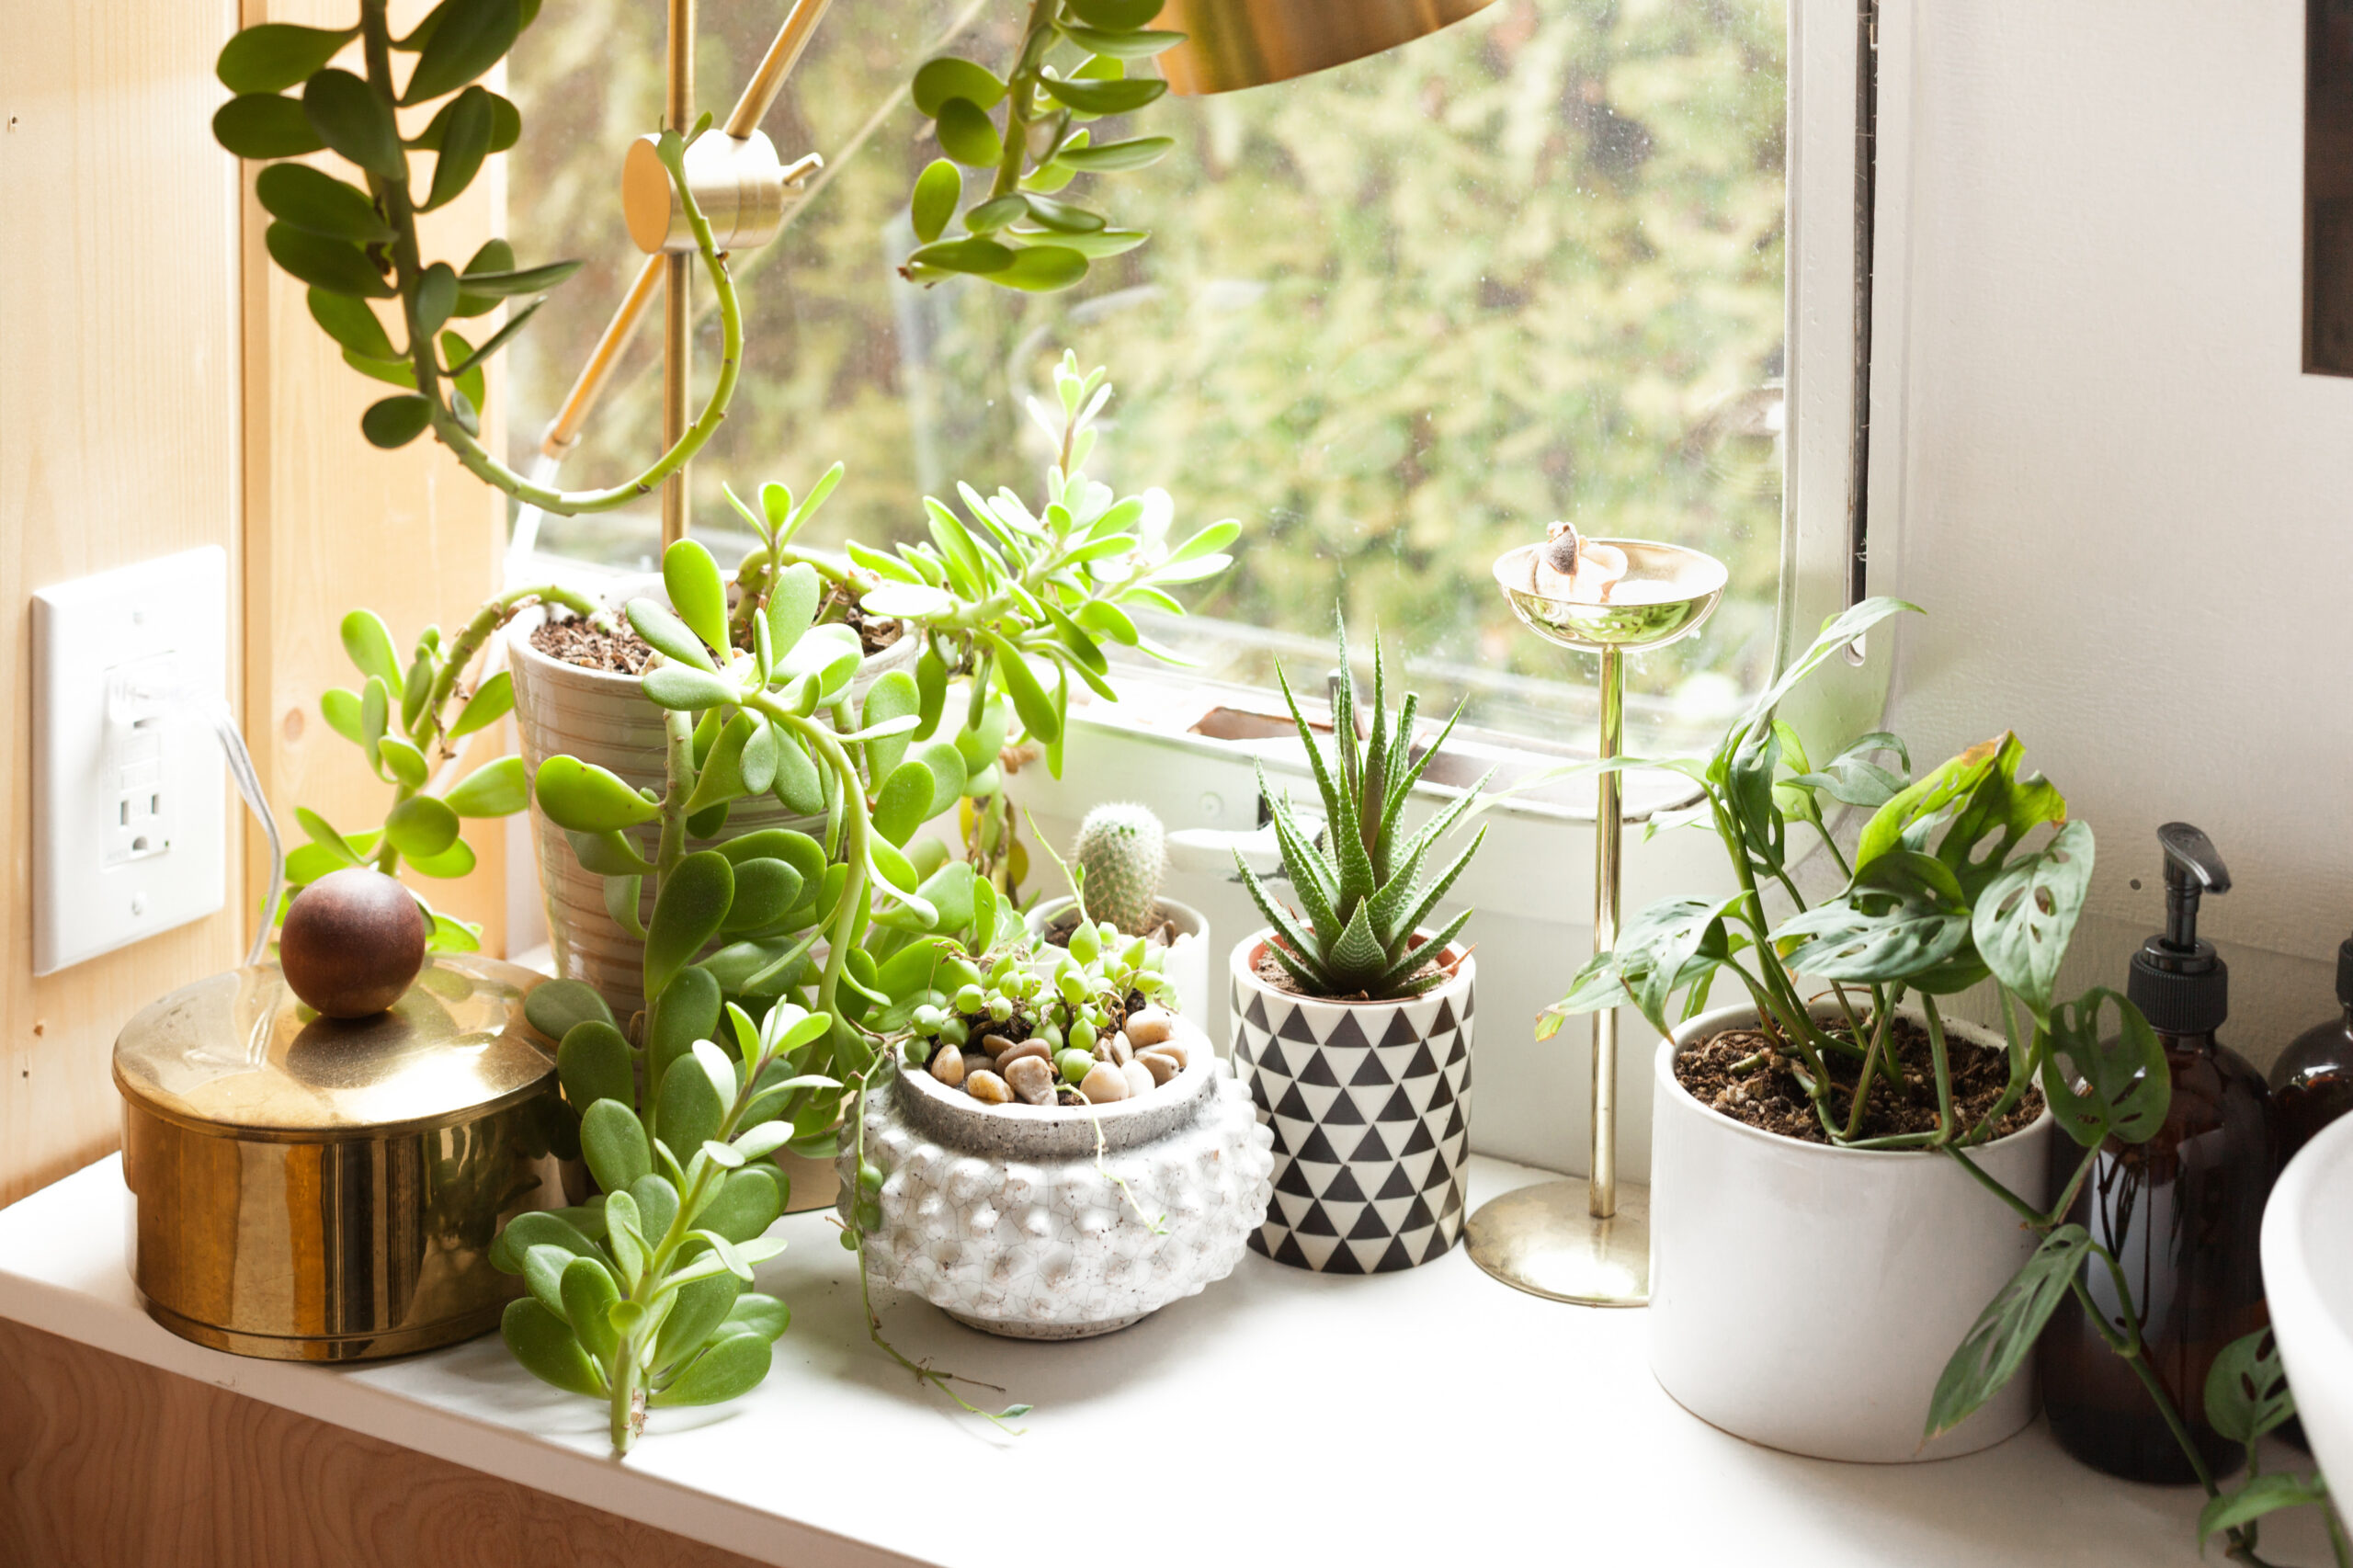 12 Budget-Friendly Sources For Buying Plants Online | Apartment